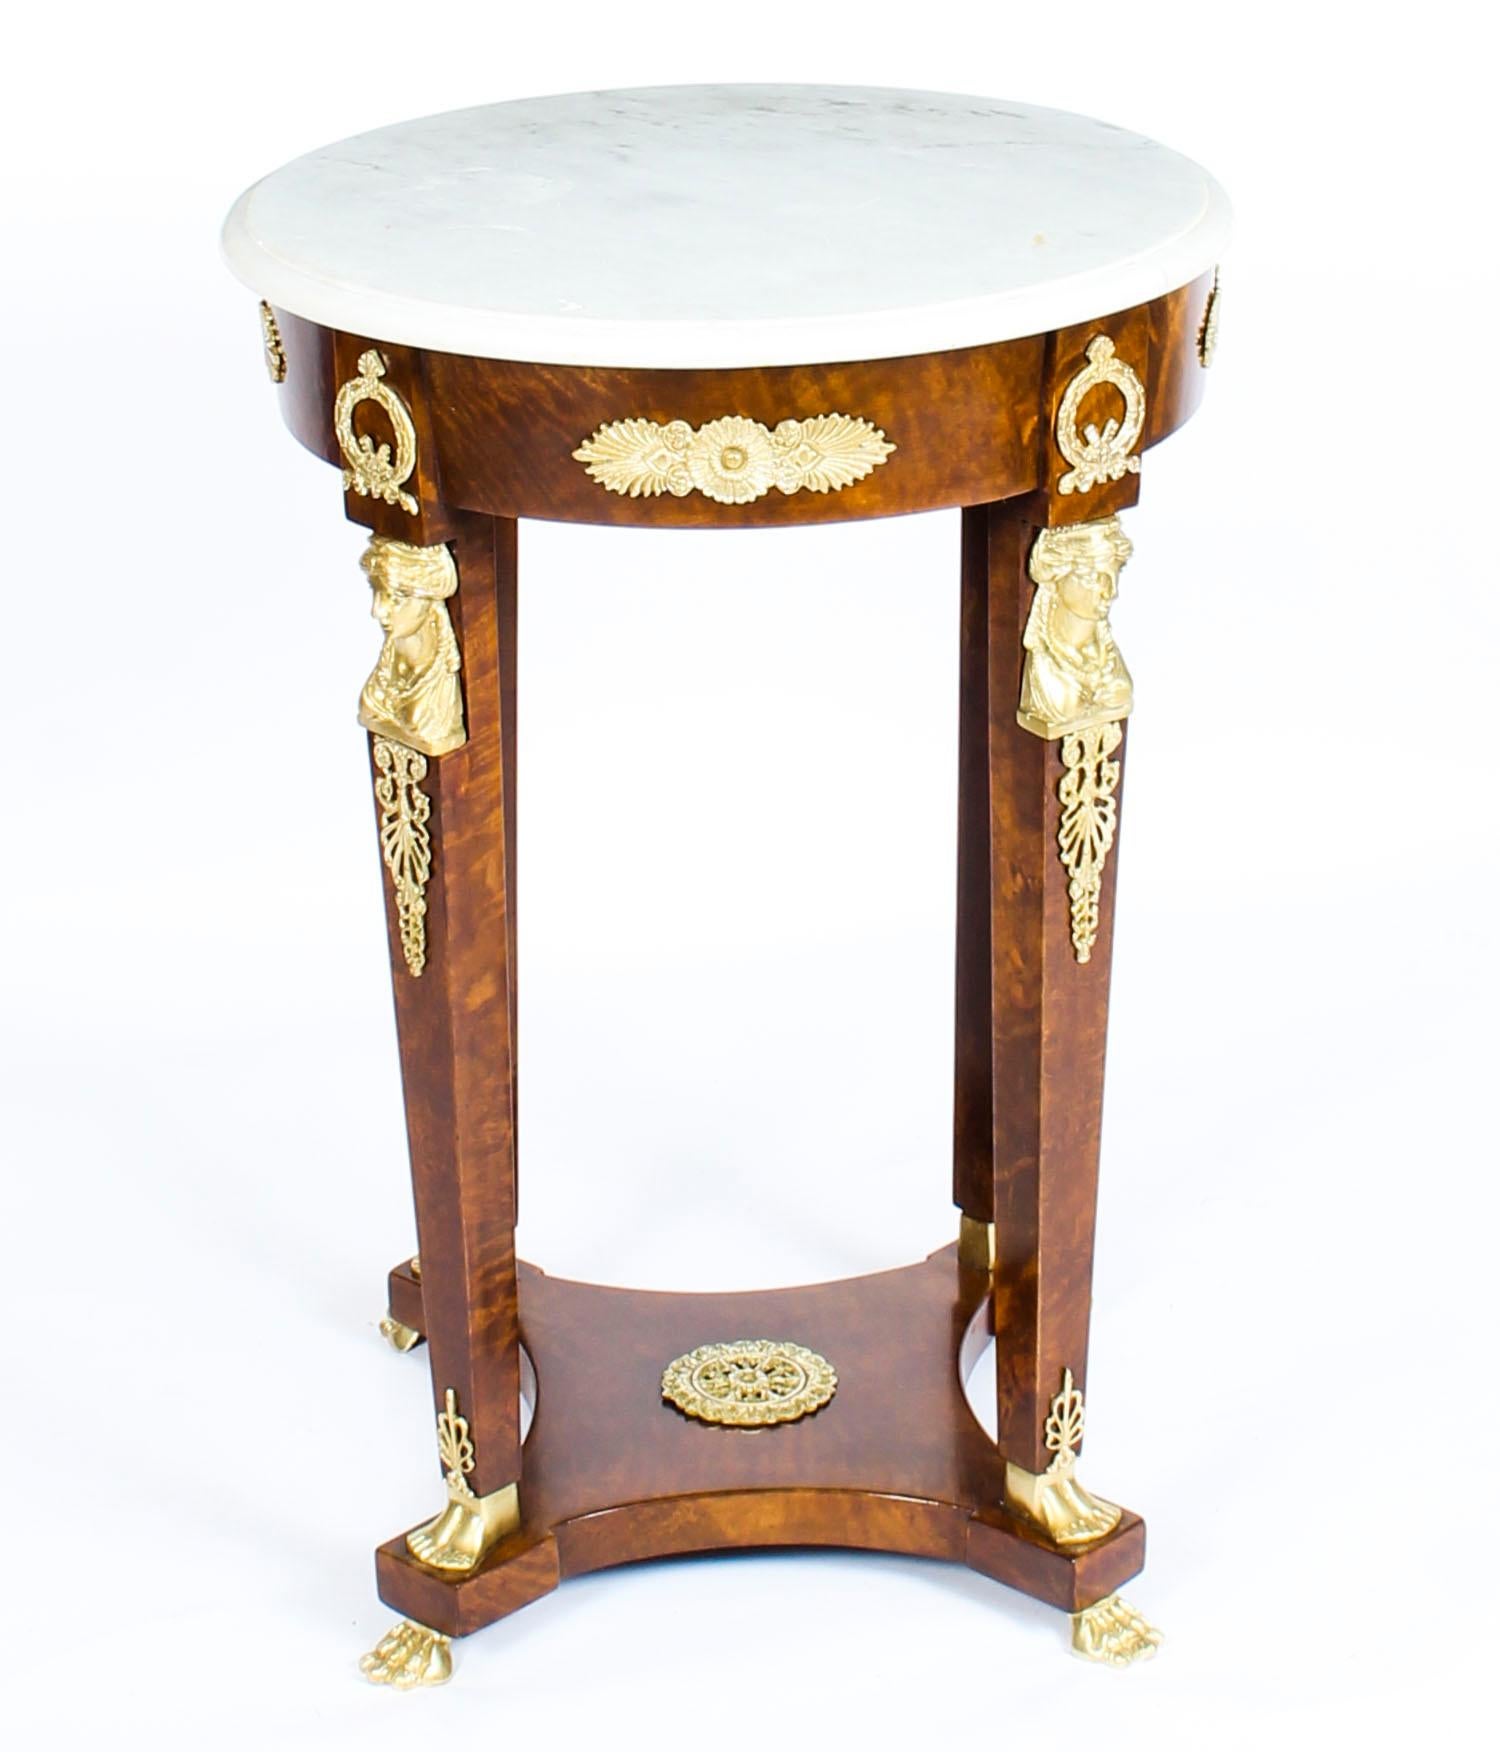 Late 19th Century French Empire Revival Ormolu Mounted Guéridon Occasional Table, 19th Century